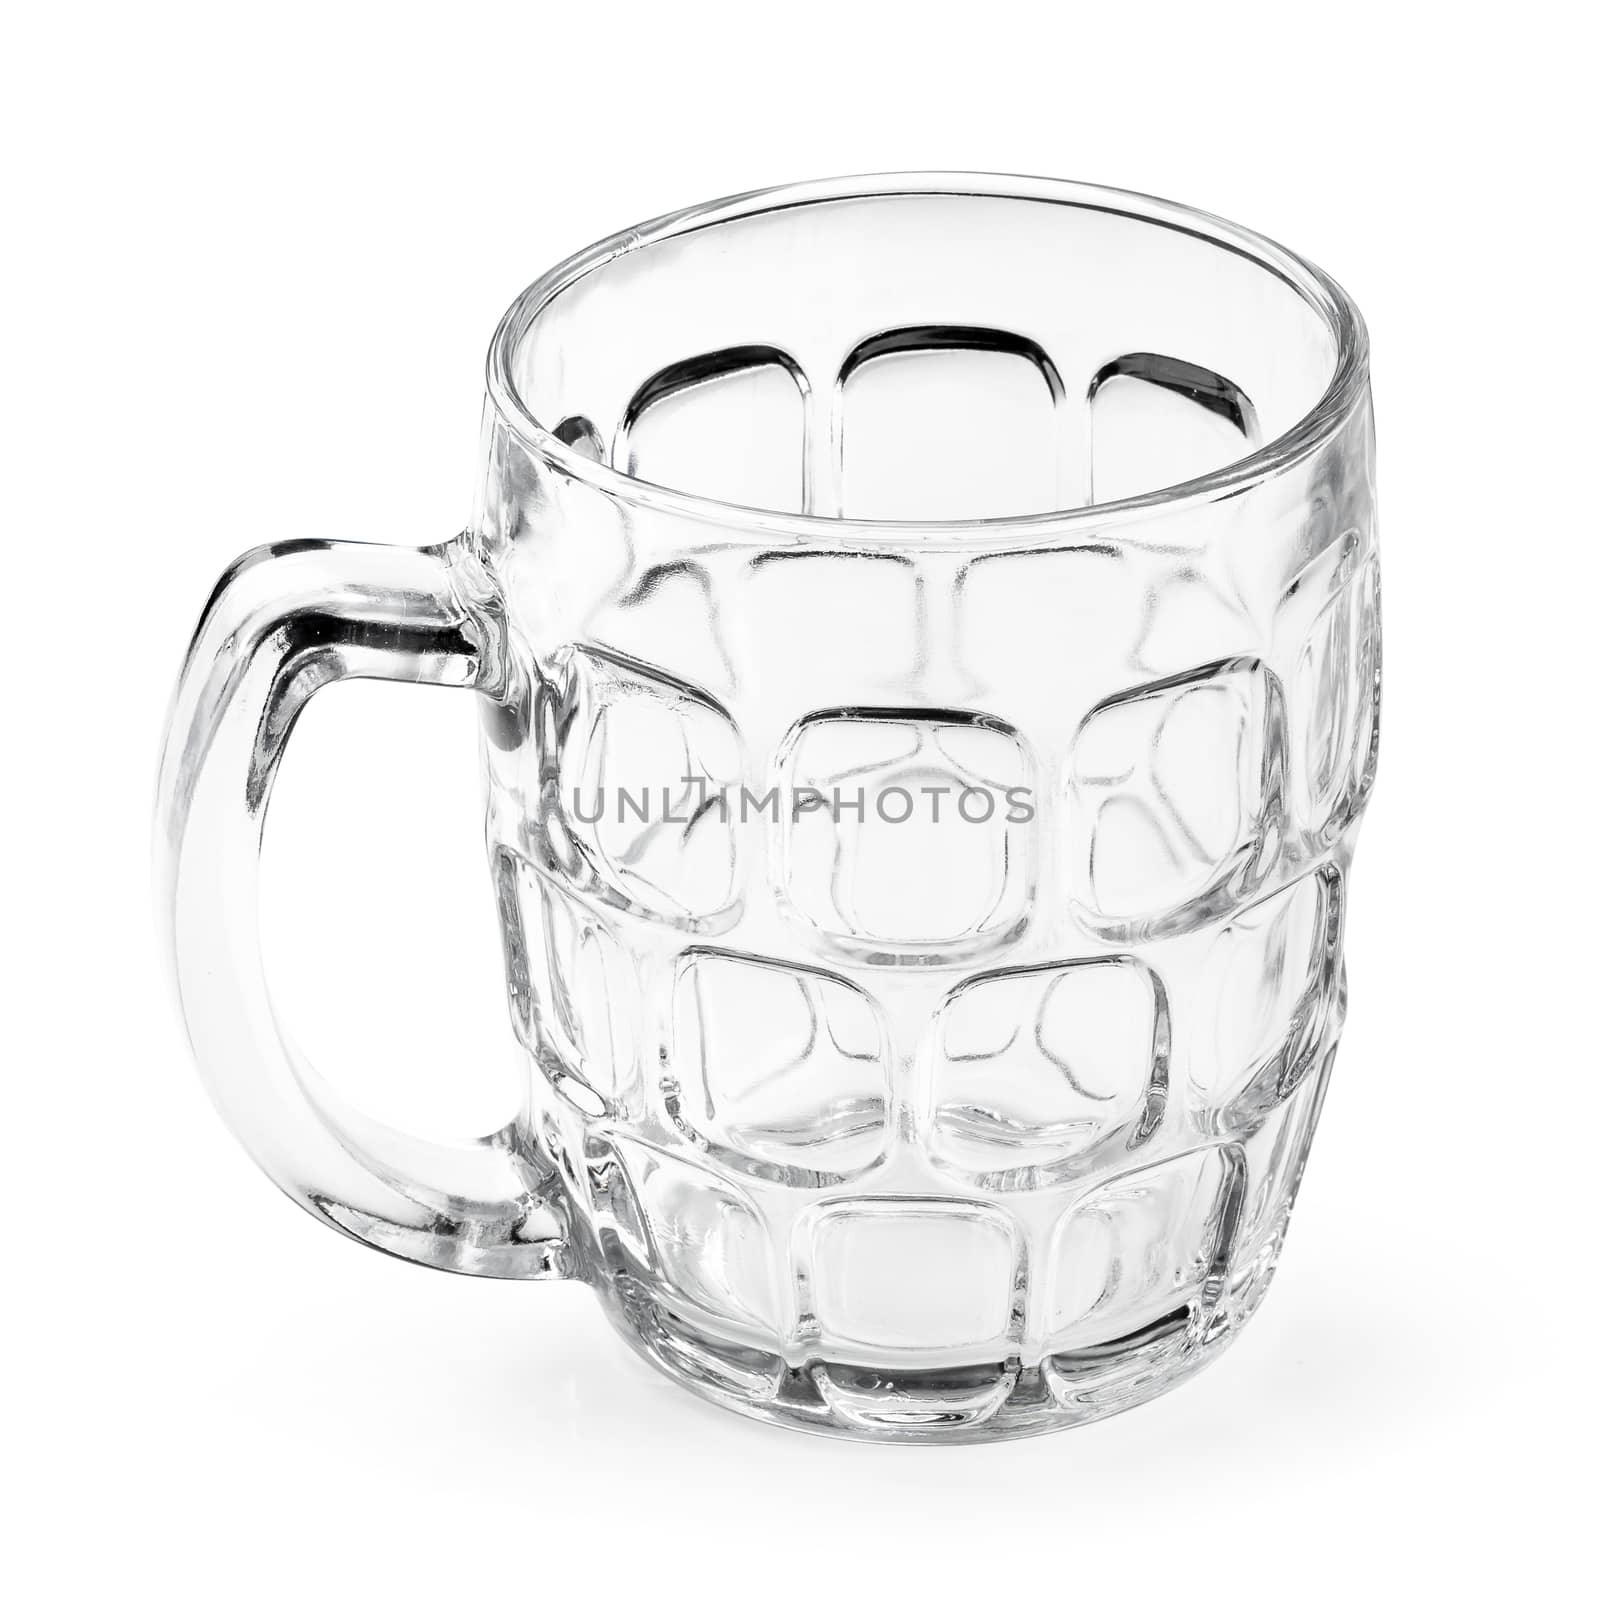 Cocktail glass. Empty beer mug isolated on a white background by kaiskynet